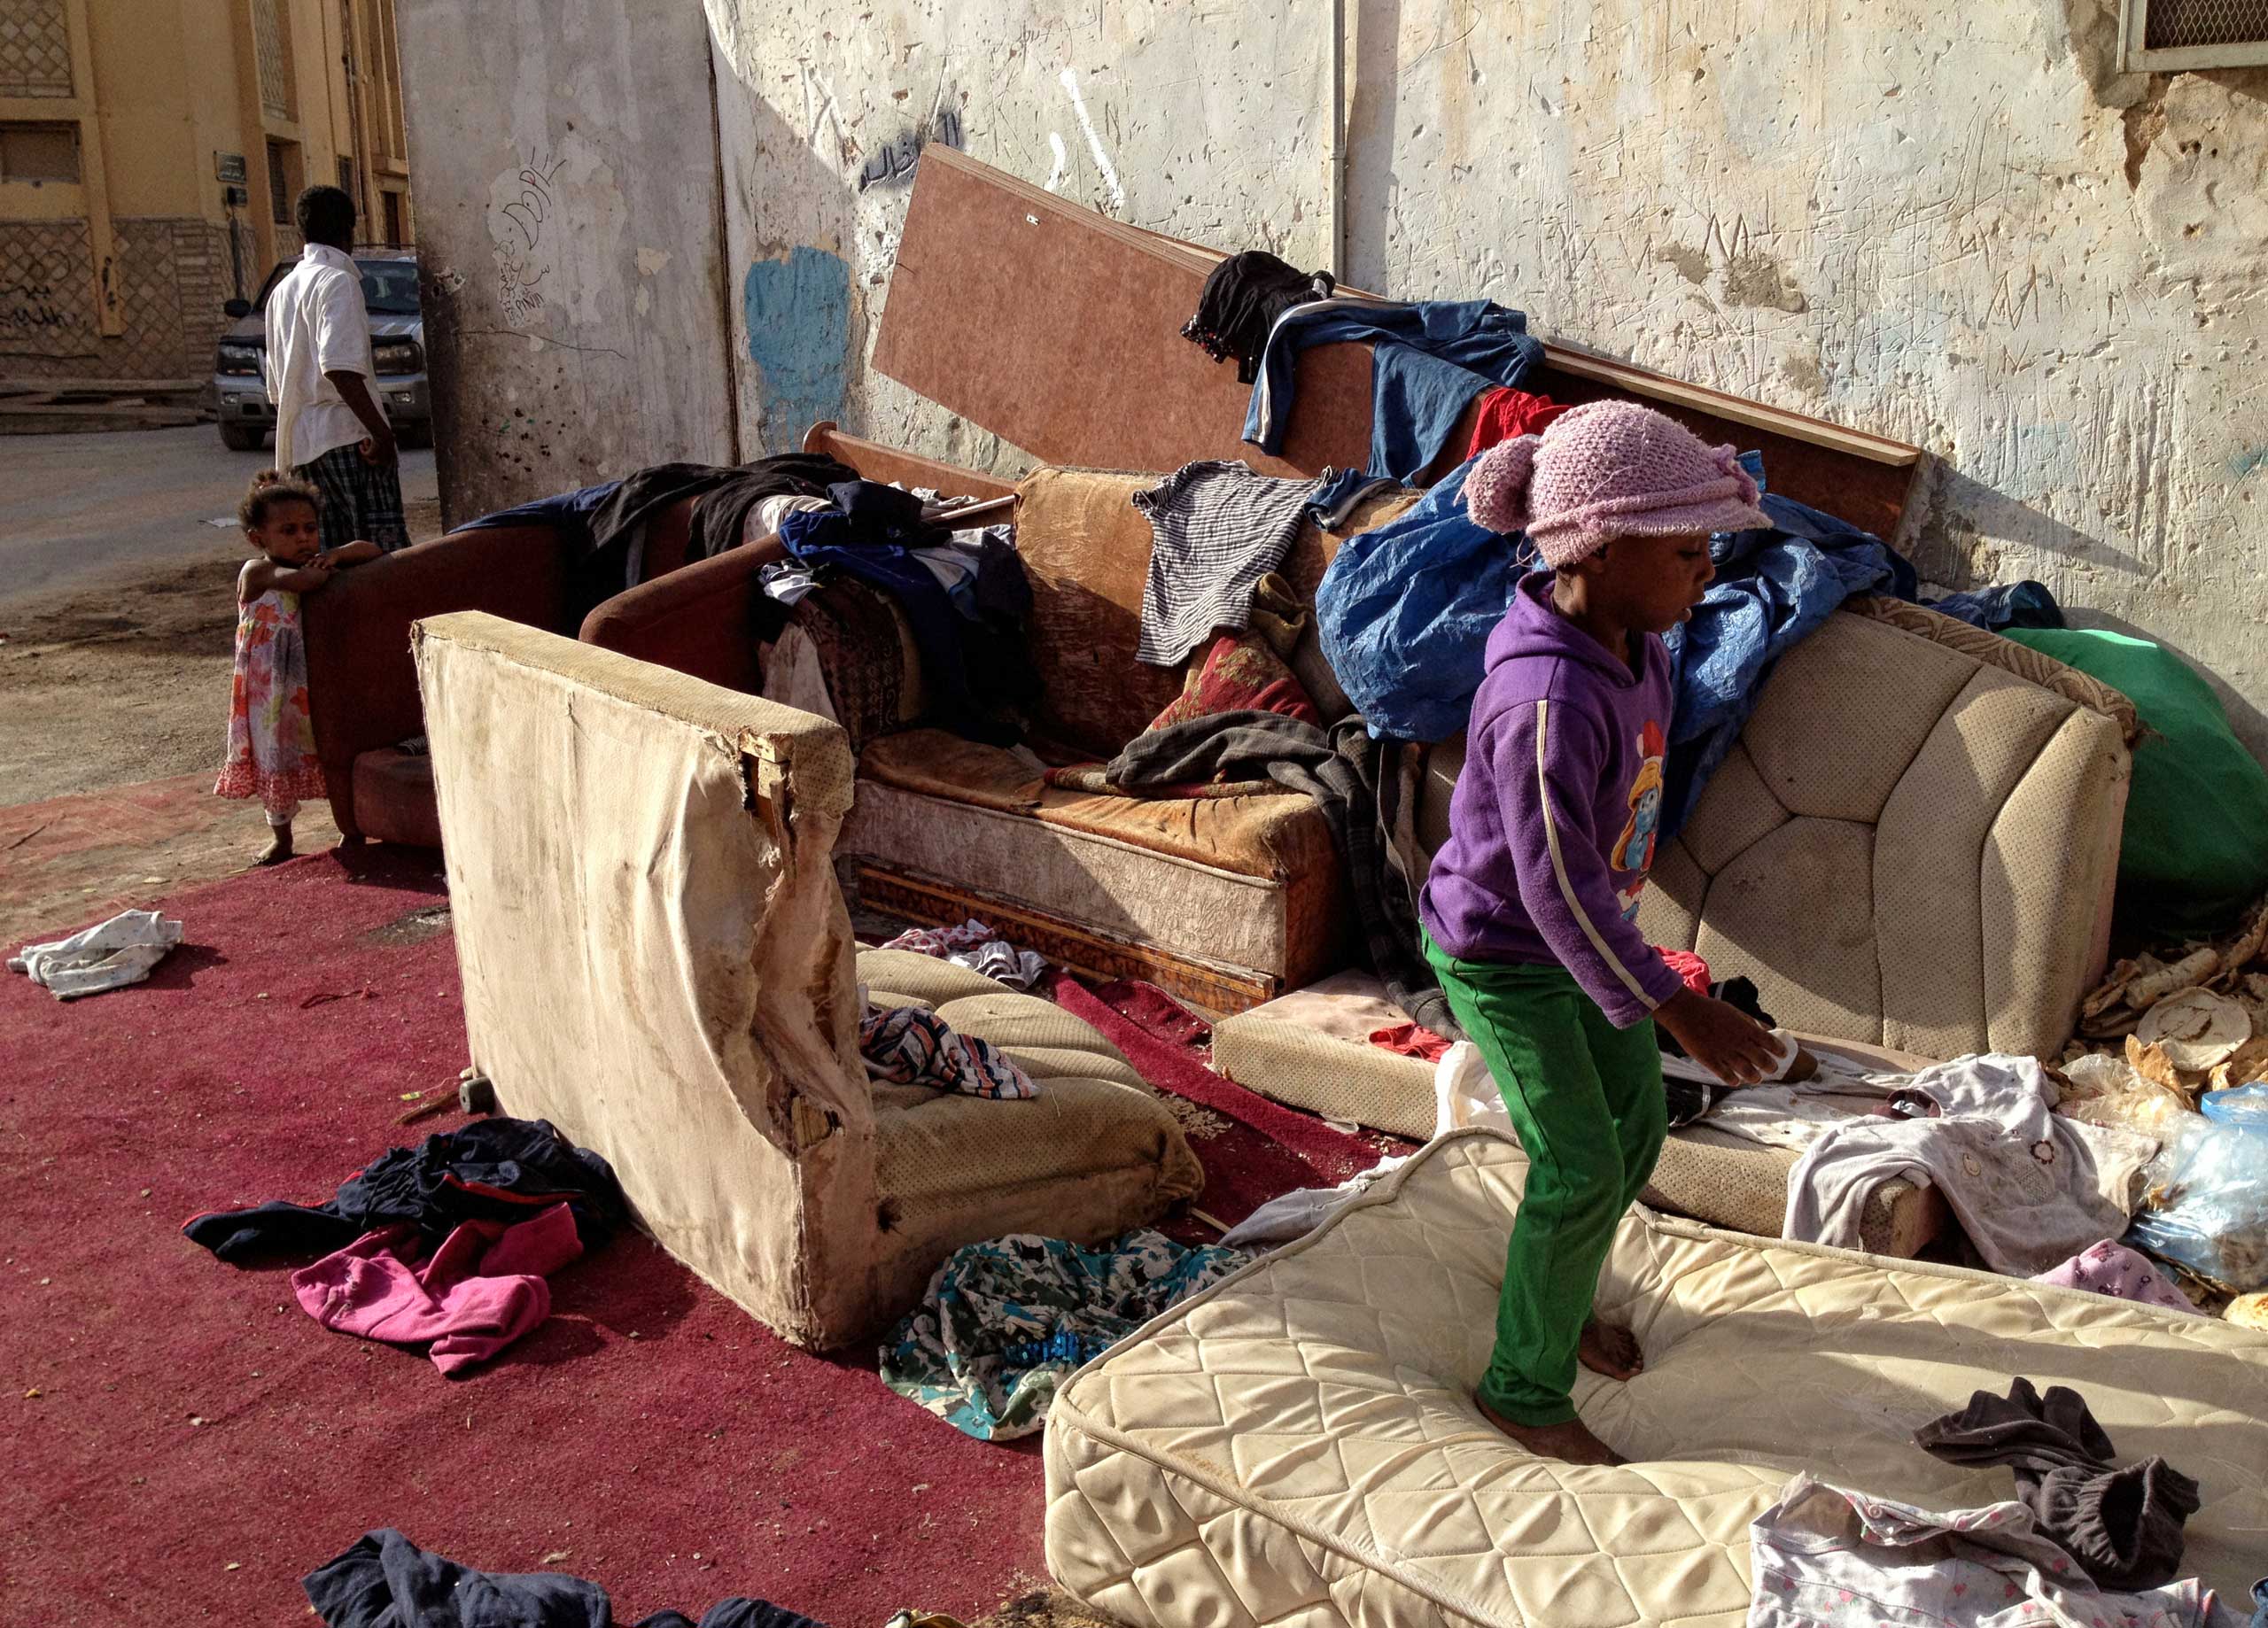 Saudi children play on old furniture outside of the home in which they live in a poor neighborhood in South Riyadh.